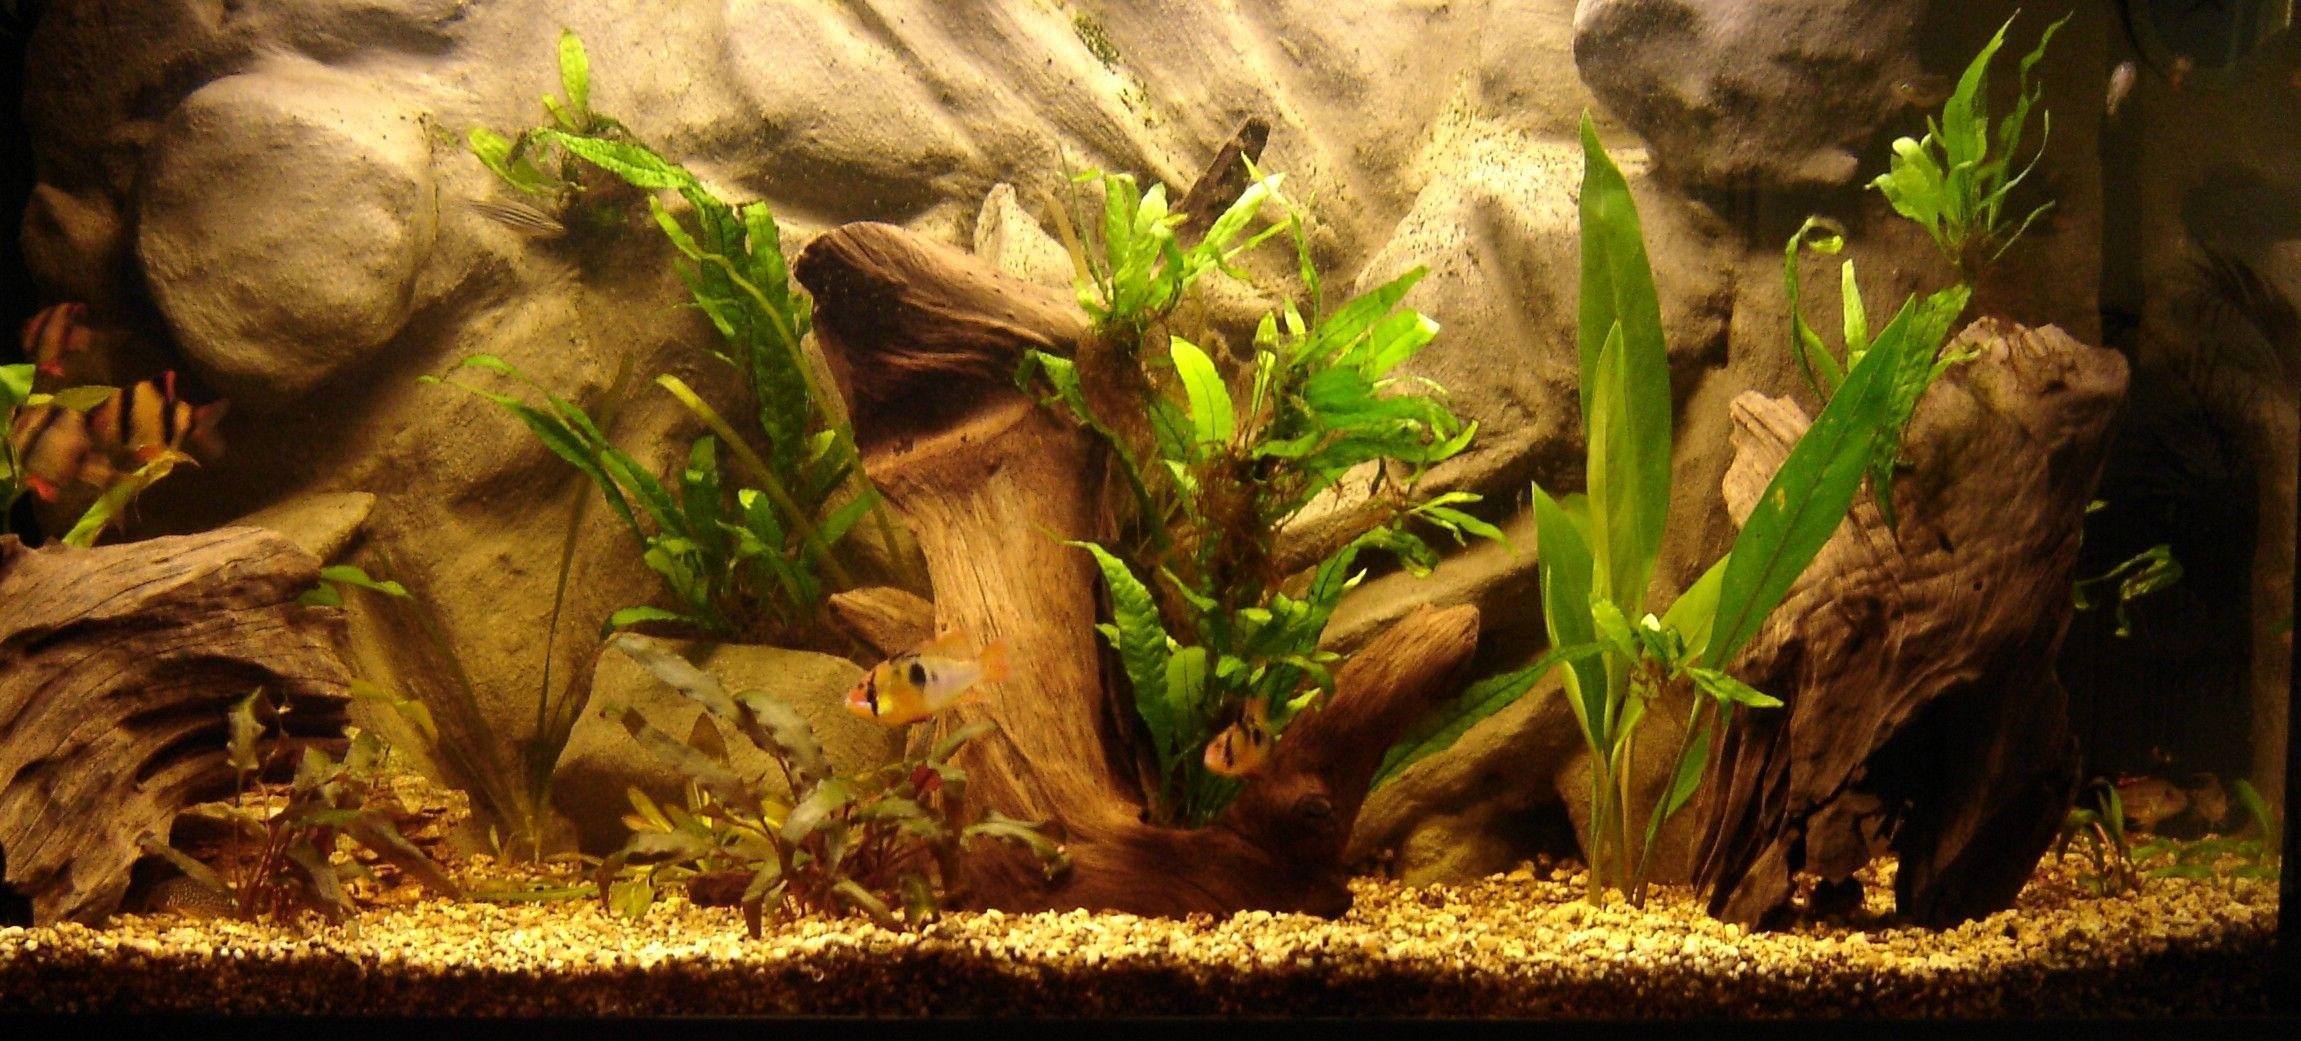 Backgrounds for Fish Tanks Lovely Aquarium Backgrounds Wallpaper Cave